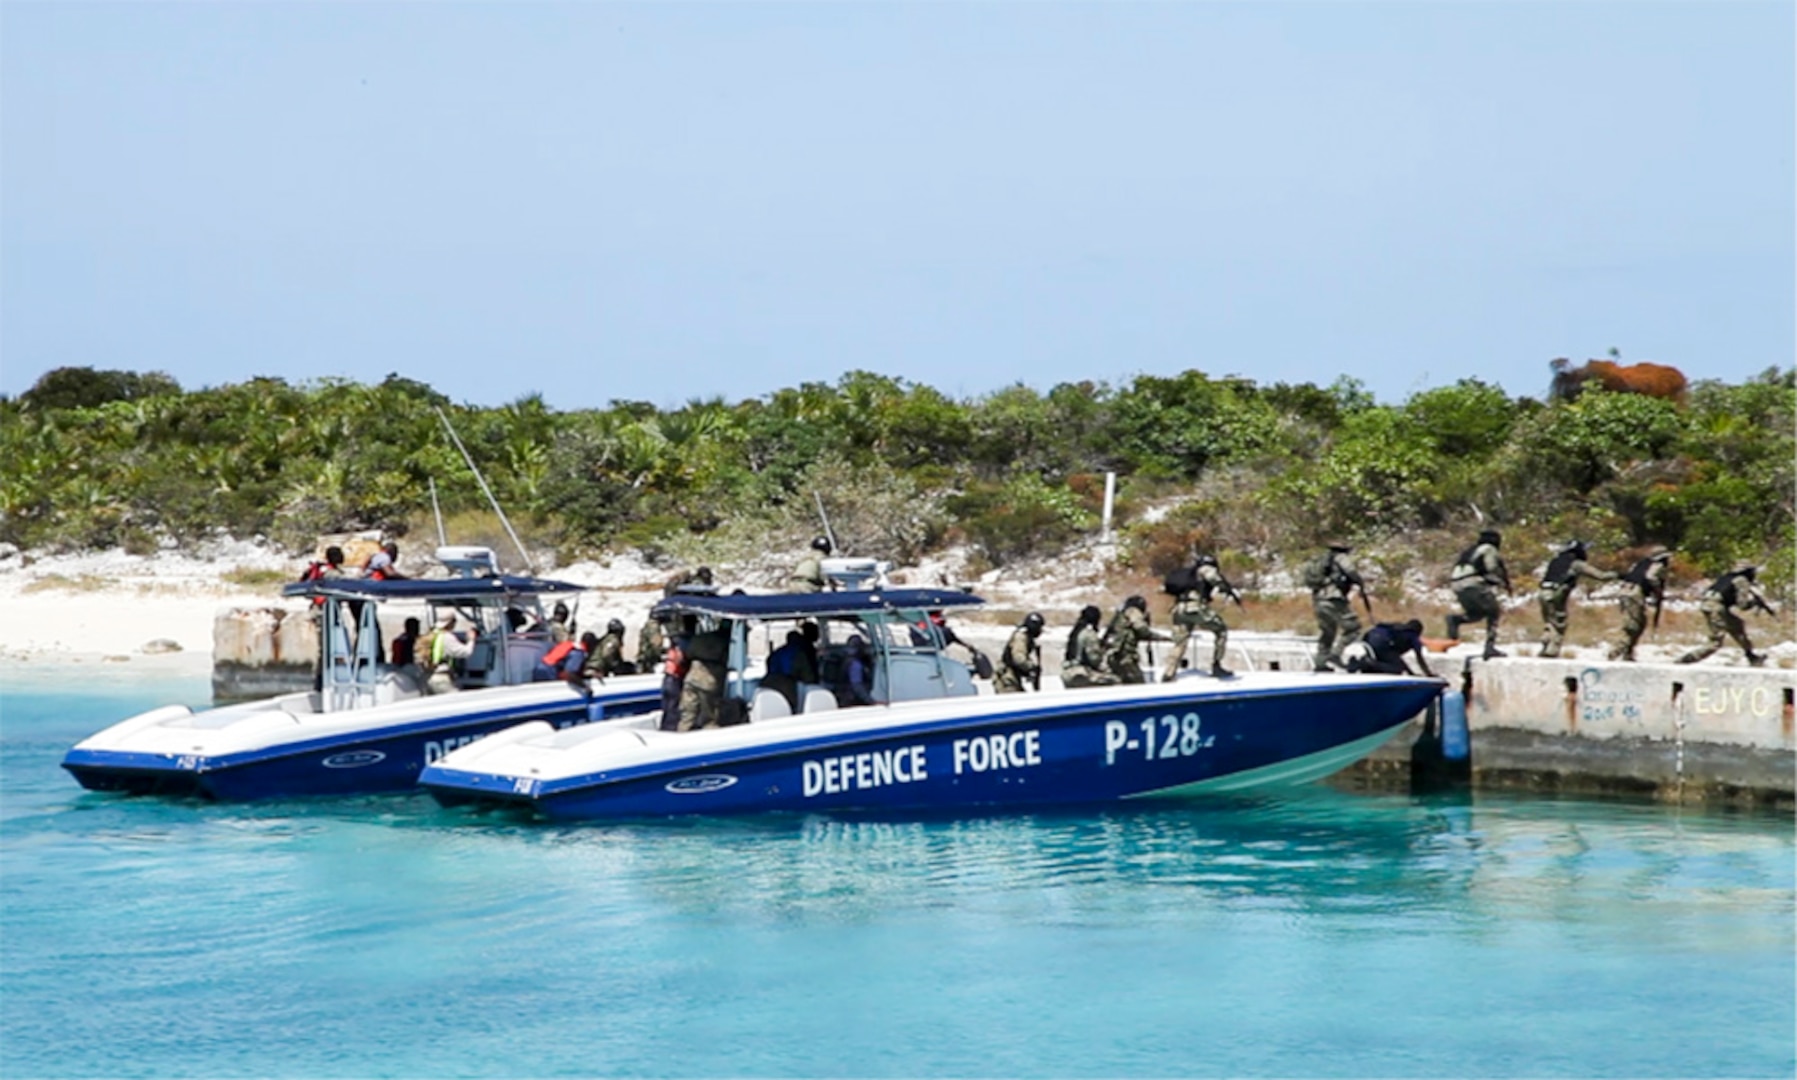 NASSAU, Bahamas (MAY 10, 2016) Members of the Royal Bahamas Defence Force exit a patrol boat during a simulated assault for Exercise Marlin Shield May 10, 2016.  Marlin Shield aims to promote interoperability between the RBDF, U.S. Northern Command and U.S. Special Operations Command North and allows both nations to practice combating terrorism and illicit trafficking in the Caribbean region. 